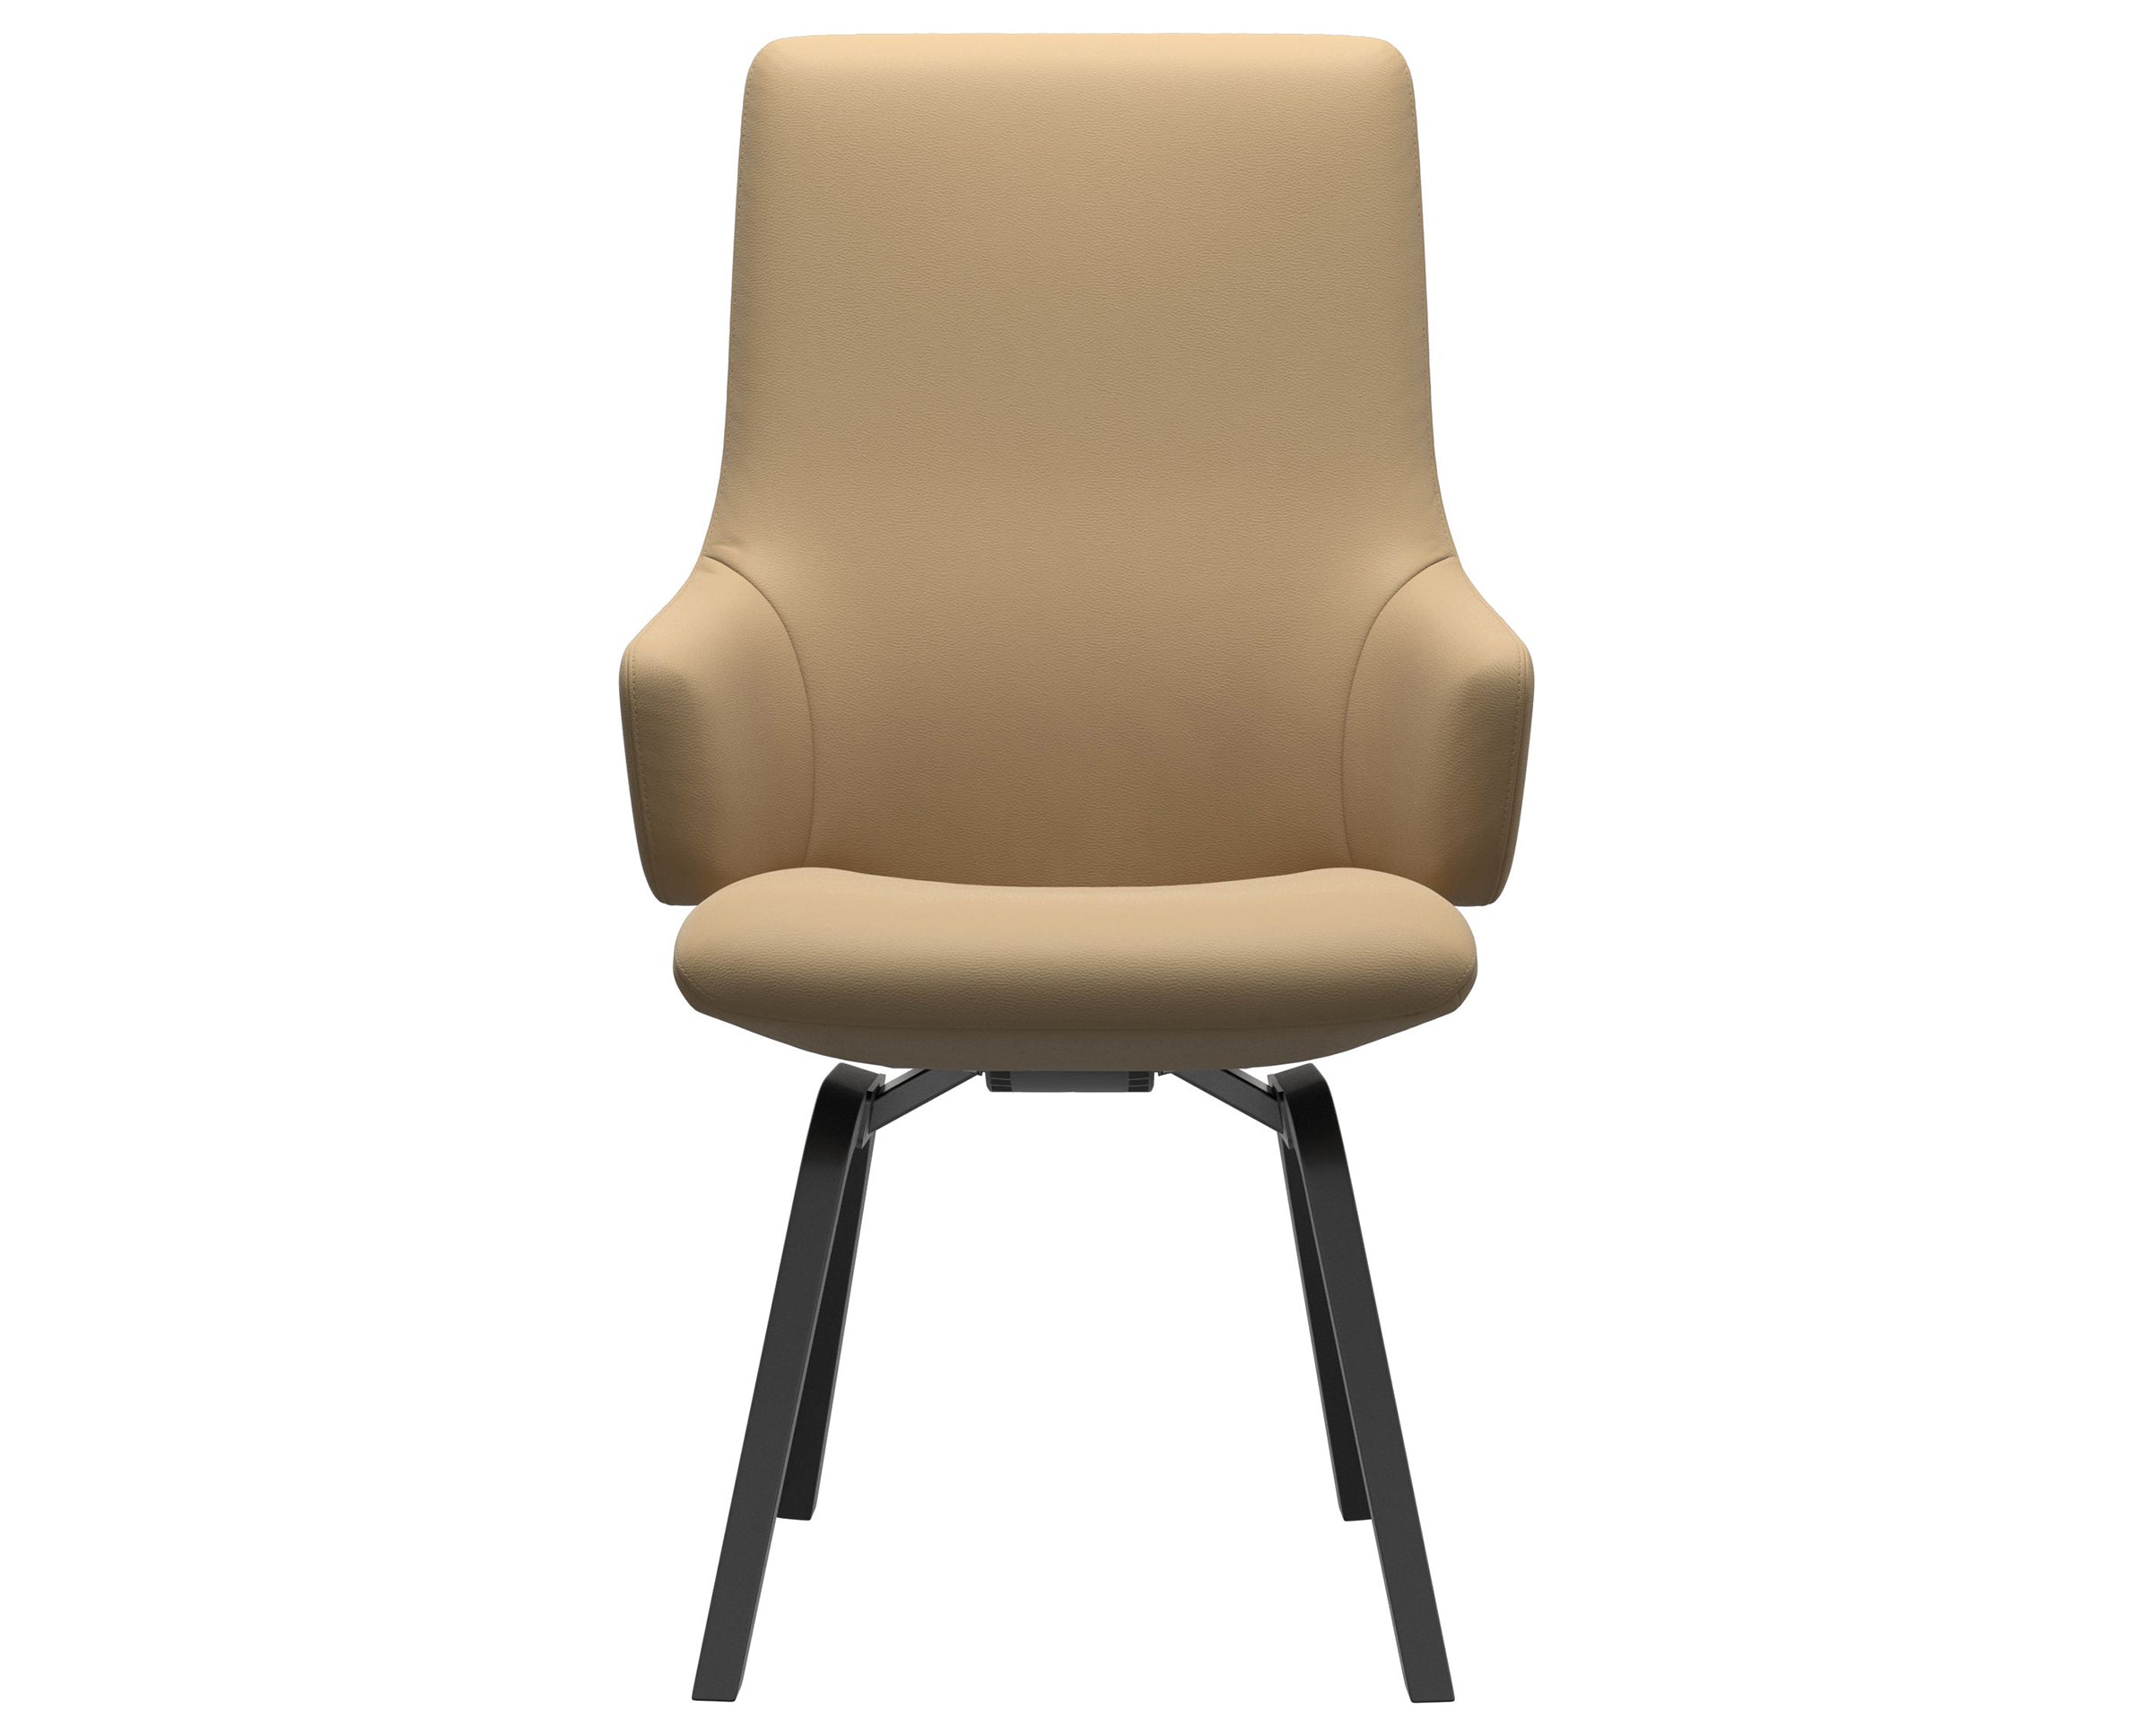 Paloma Leather Sand and Black Base | Stressless Laurel High Back D200 Dining Chair w/Arms | Valley Ridge Furniture